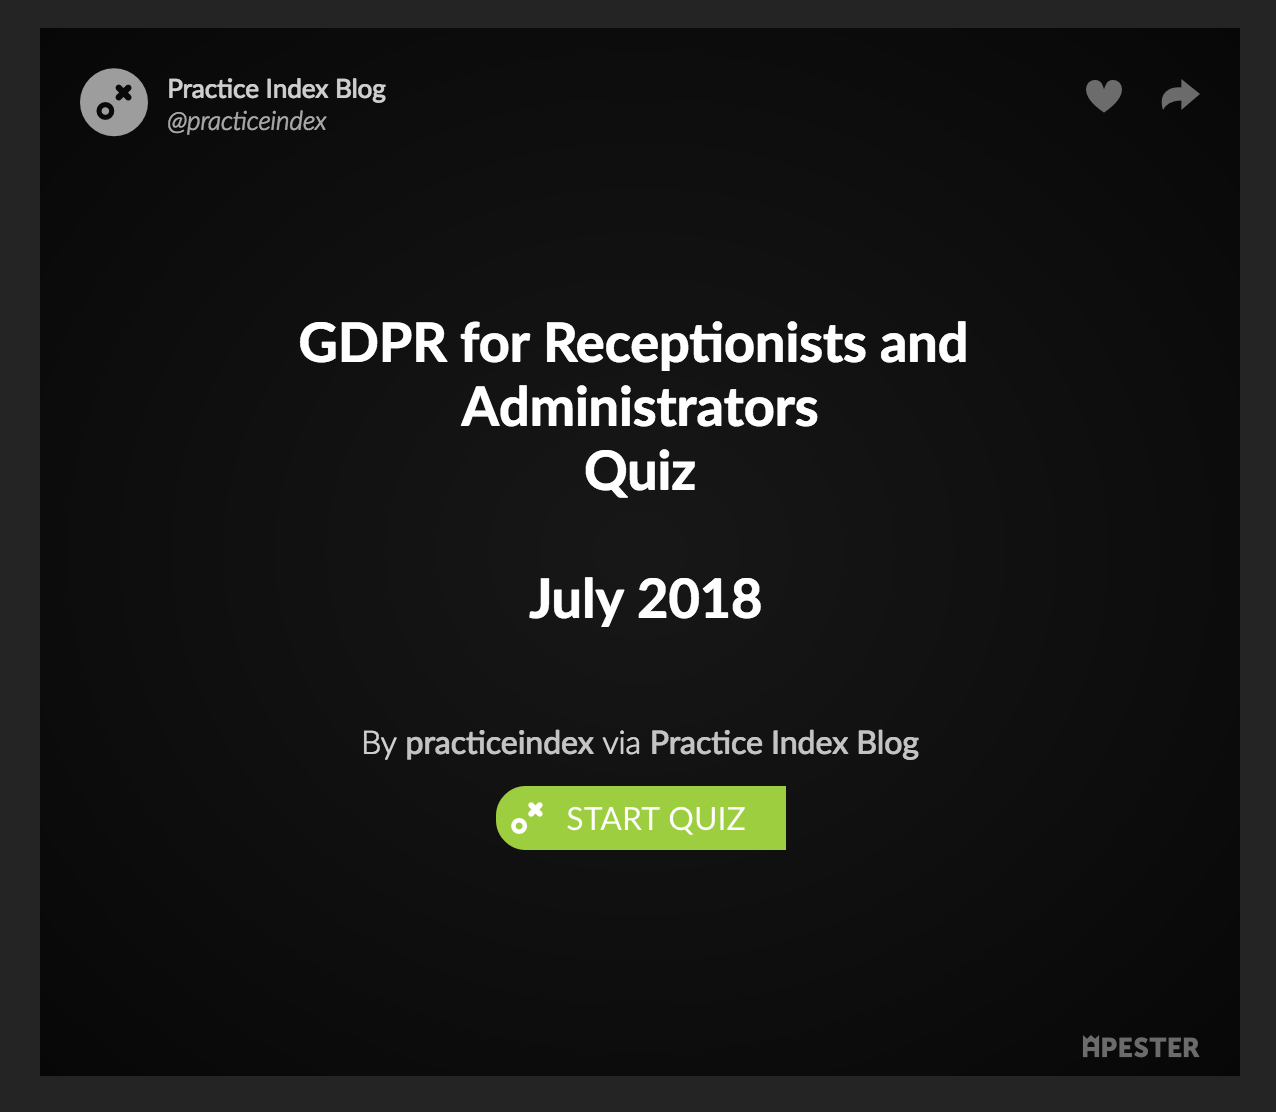 GDPR for GP Receptionists and Administrators Quiz